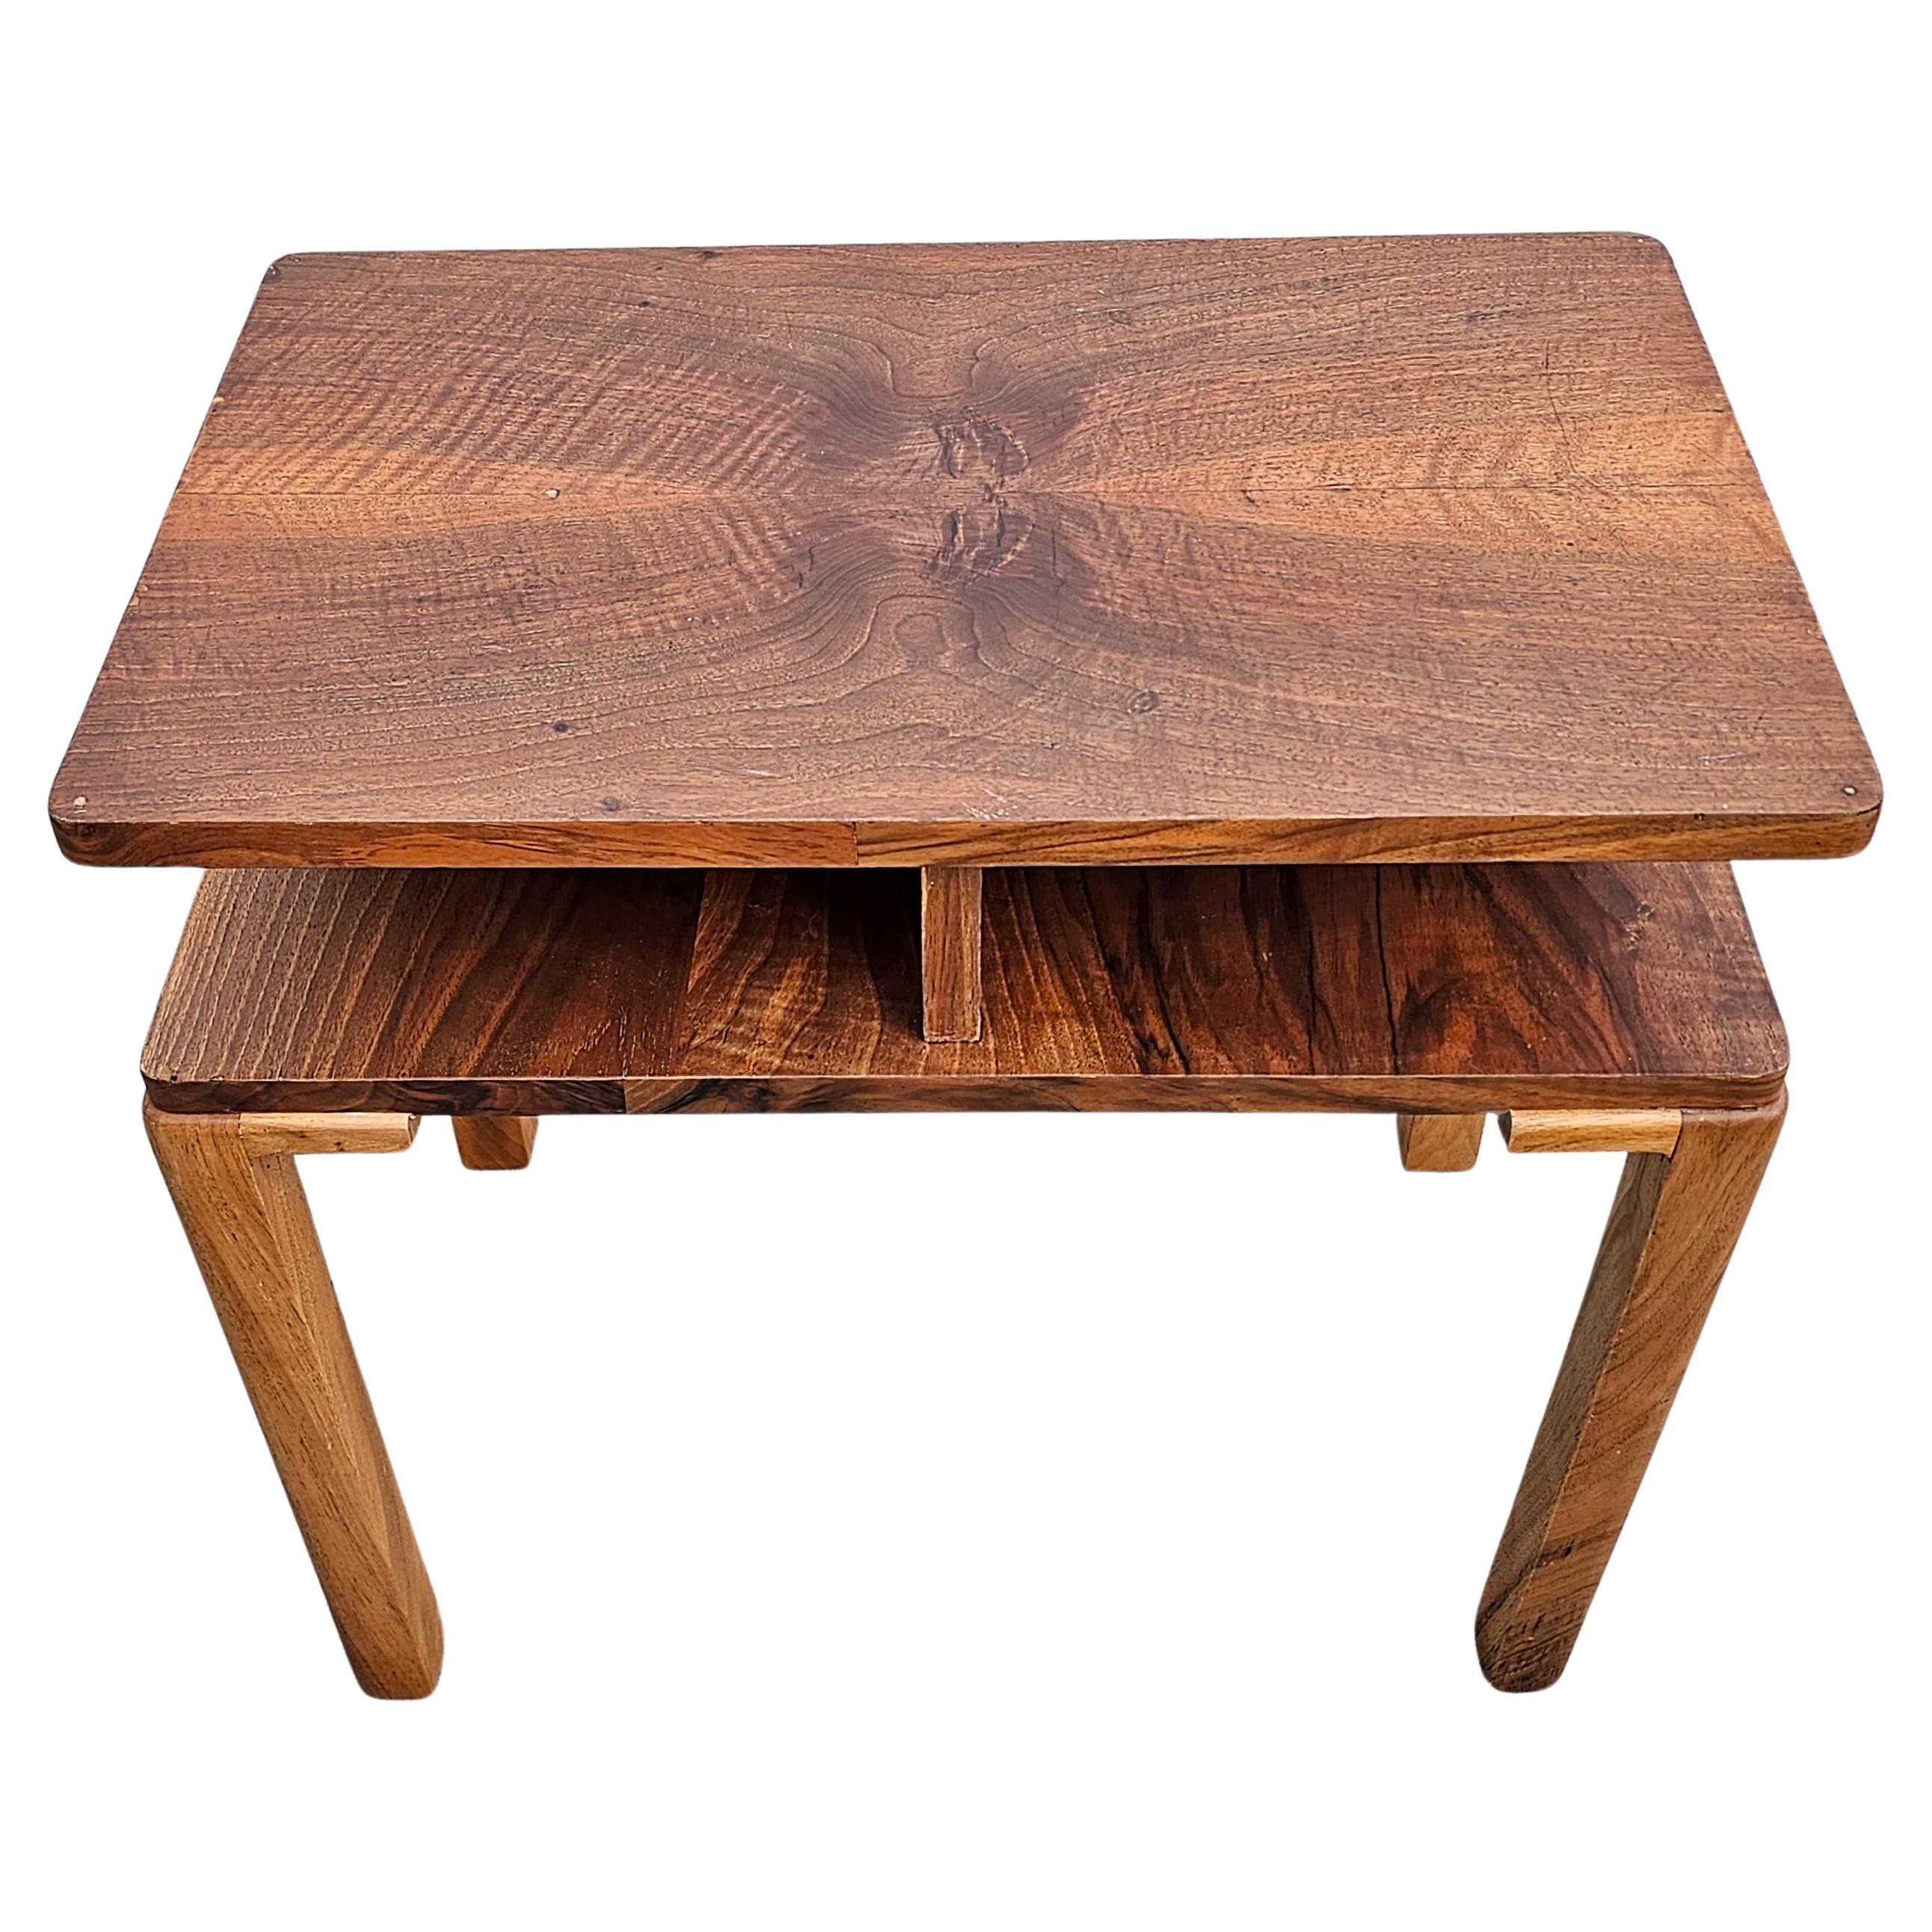 Rectangular Two Tiered Art Deco Walnut Side Table, Austria 1930s For Sale